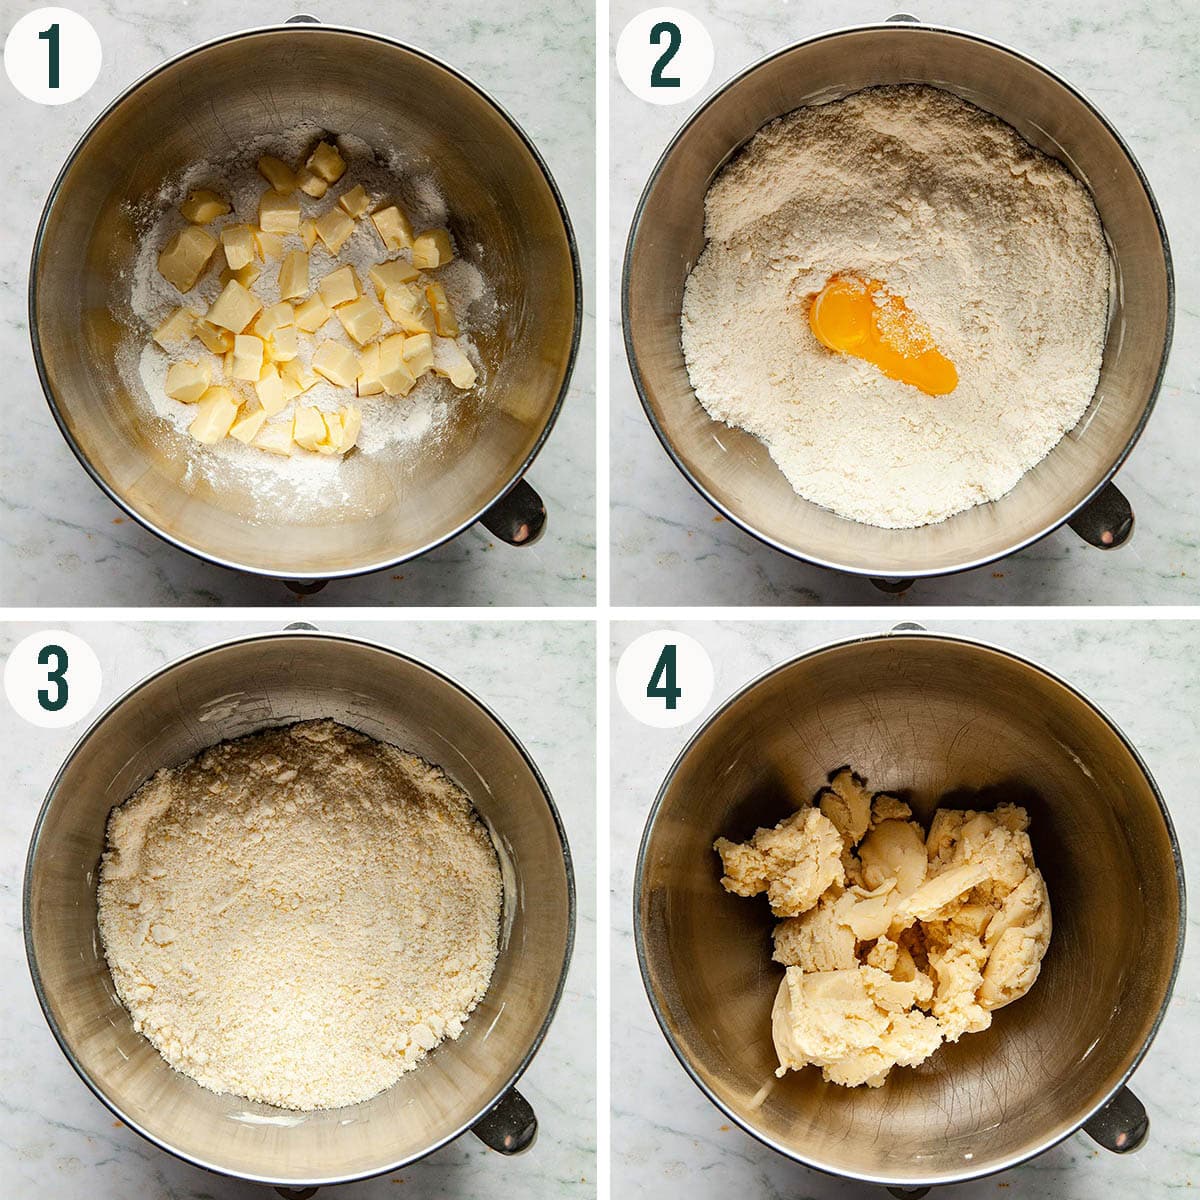 Sweet shortcrust steps 1 to 4, mixing the dough.